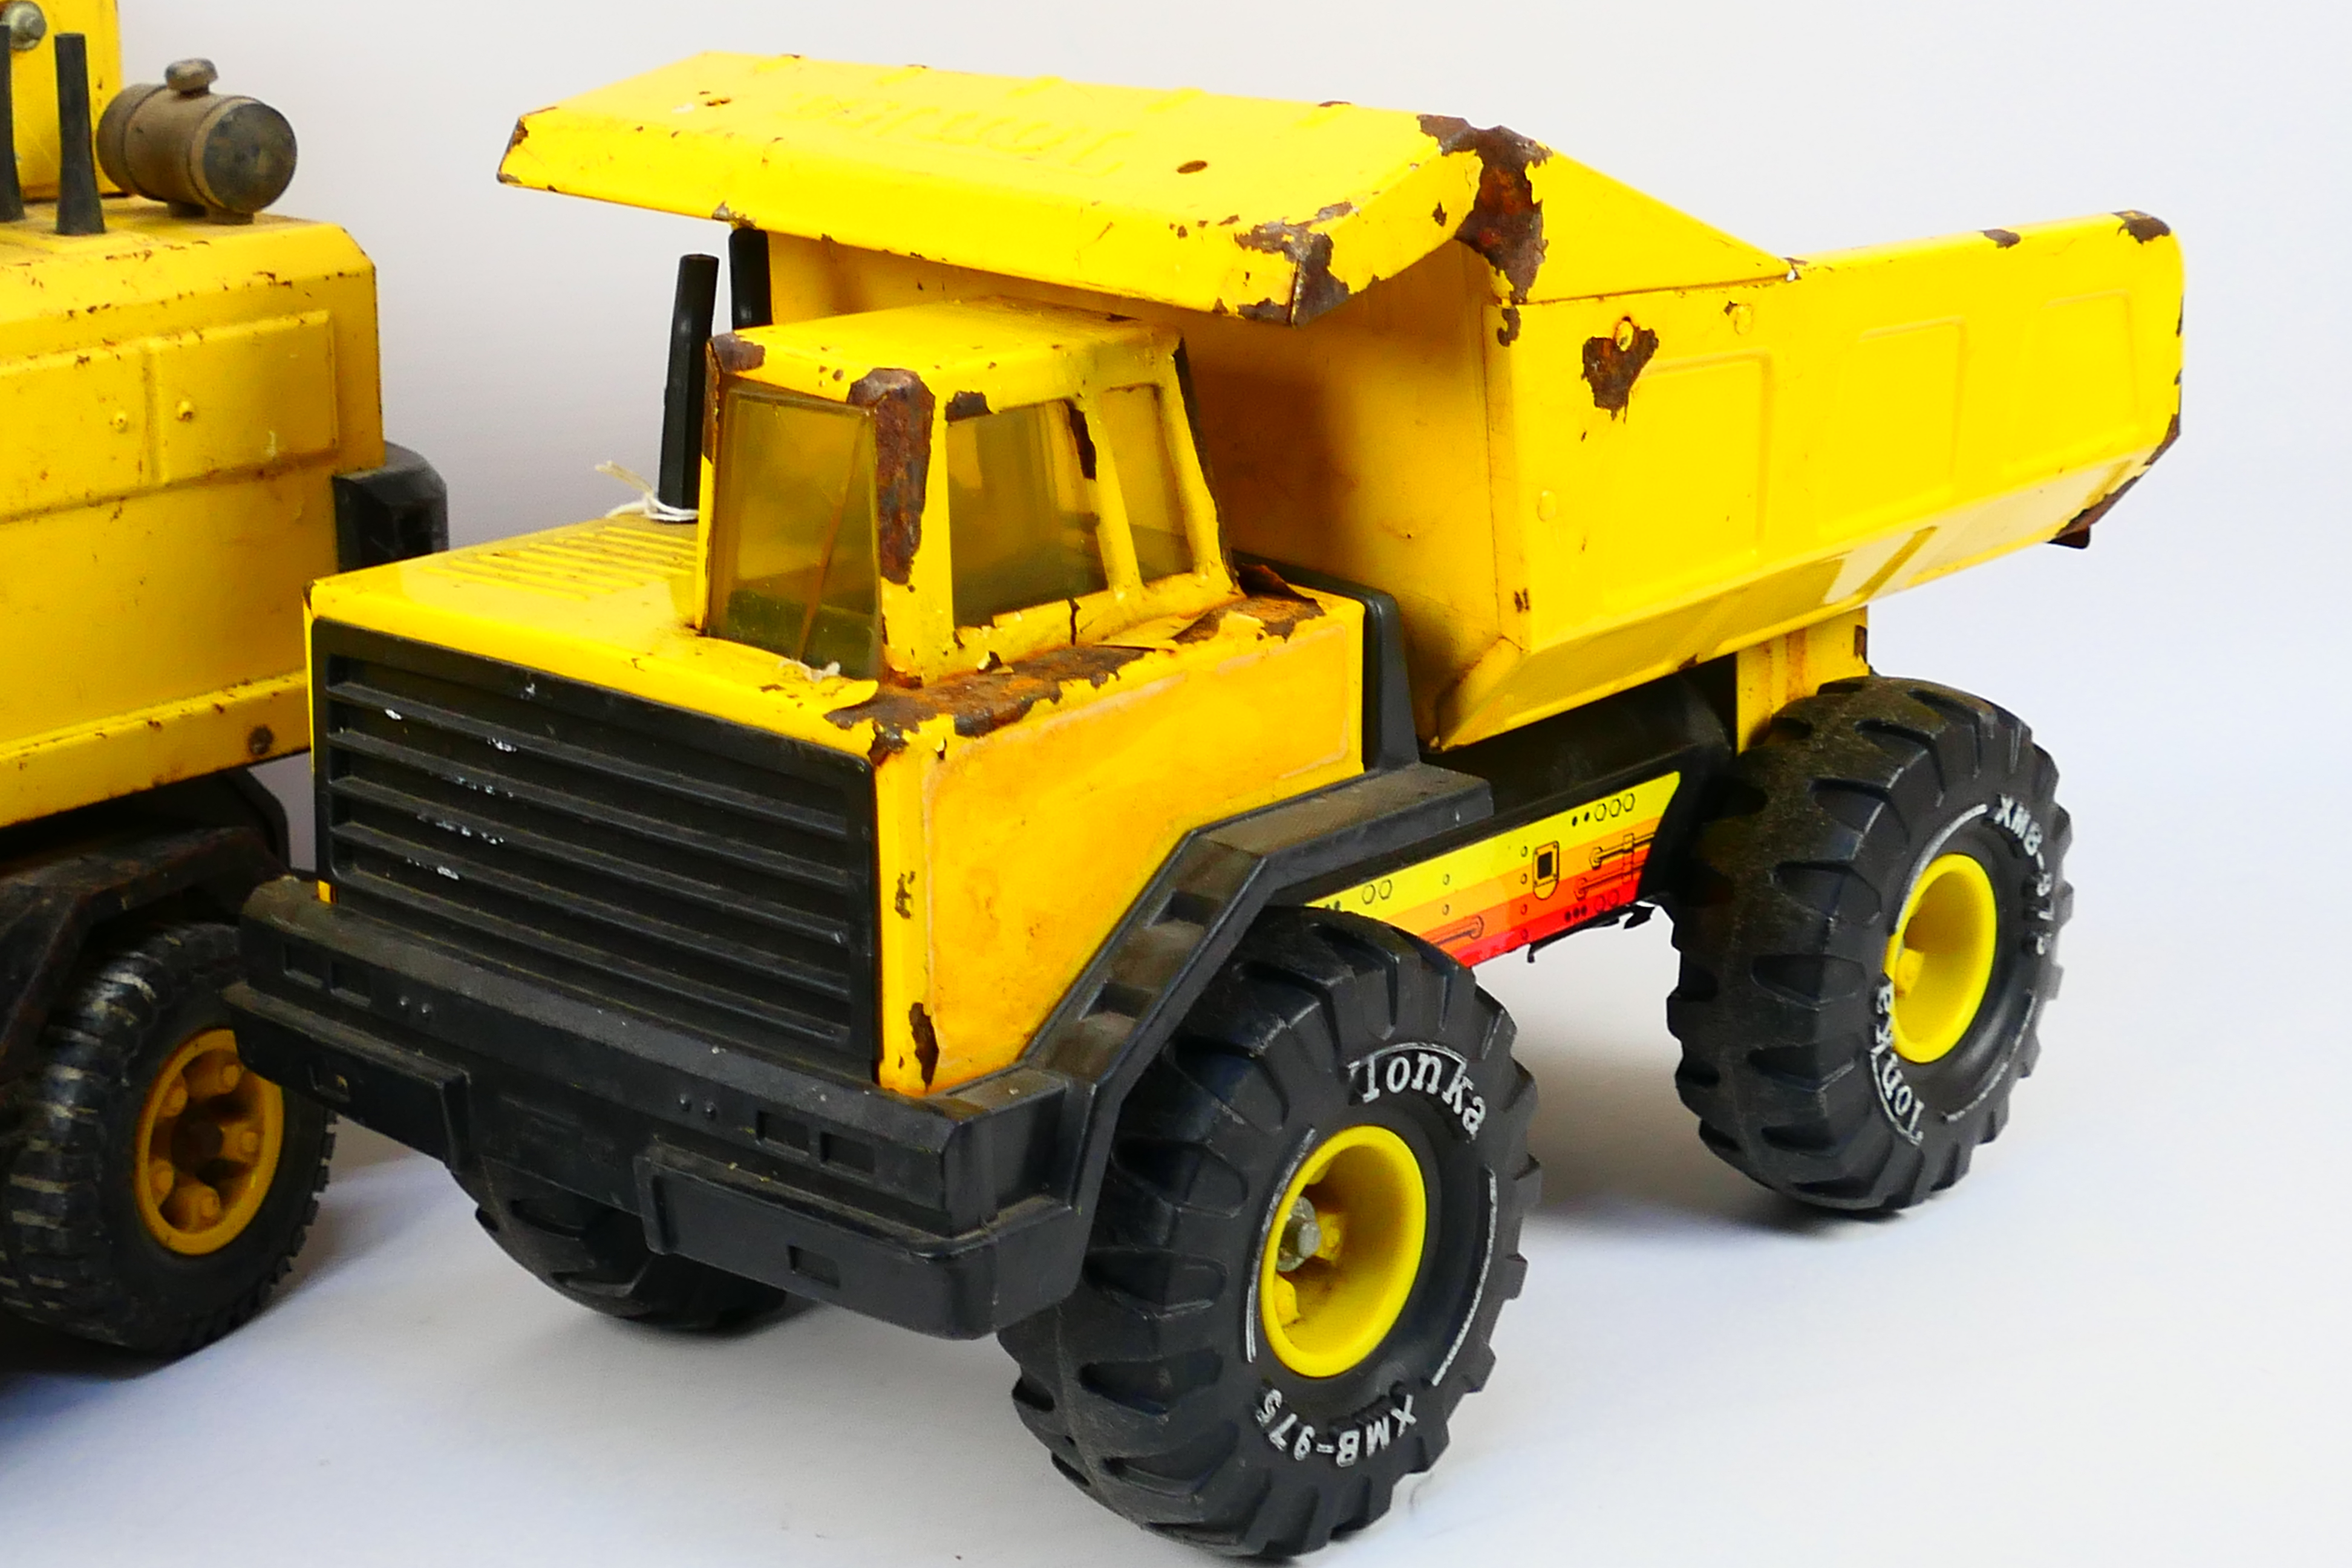 Tonka - 2 x large Tonka construction vehicles - Lot includes a Turbo Diesel dump truck and a crane. - Image 2 of 5